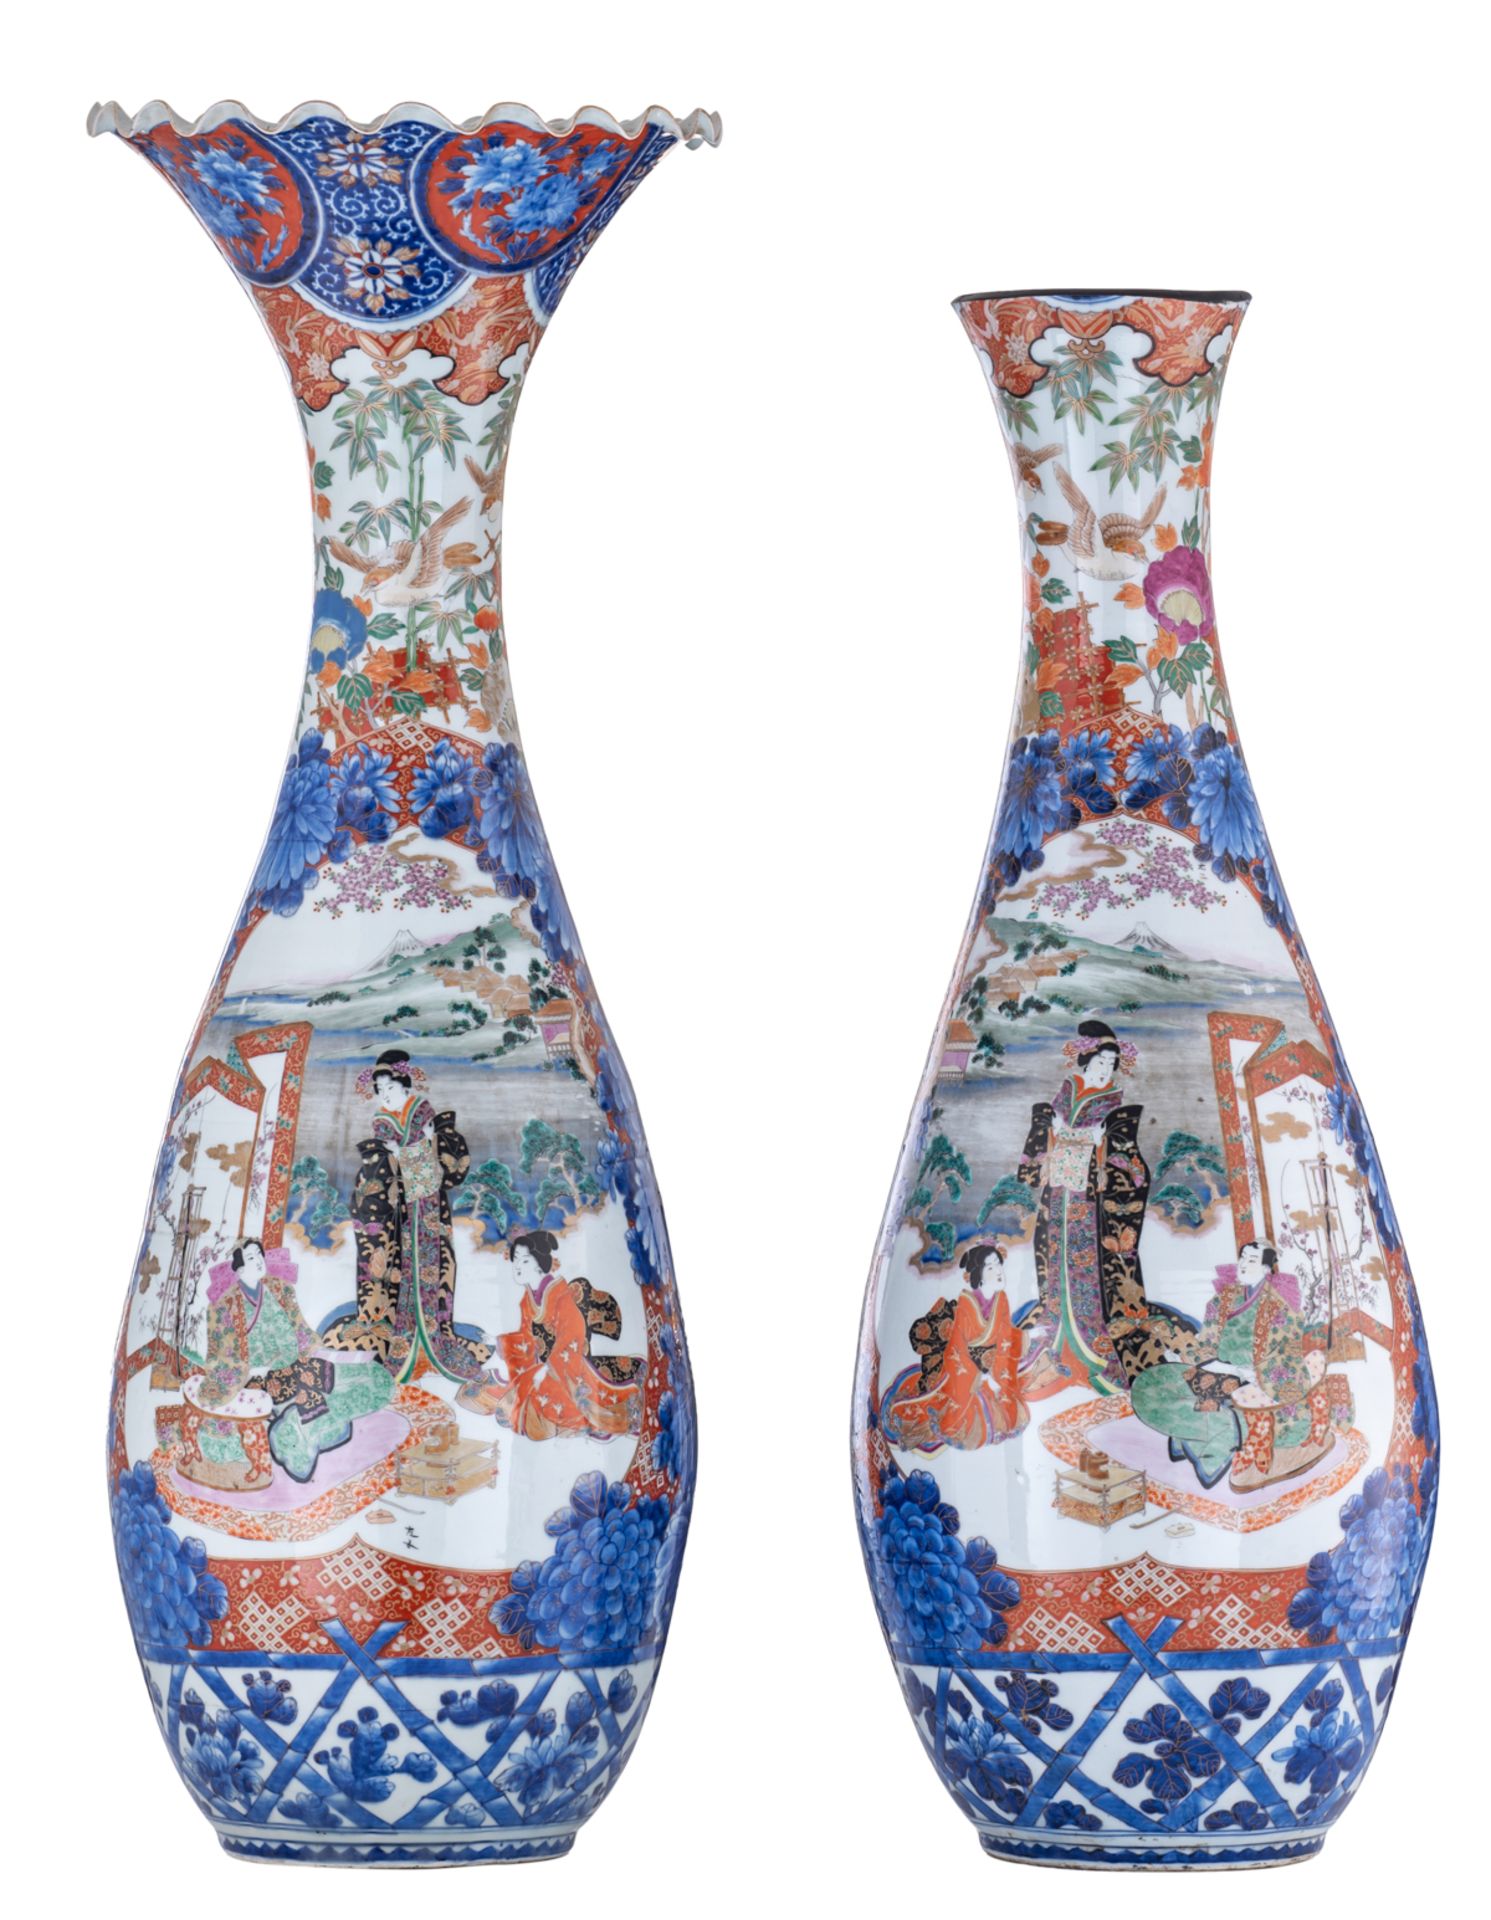 A large pair of Japanese polychrome floral vases, overall decorated with birds and an animated scene